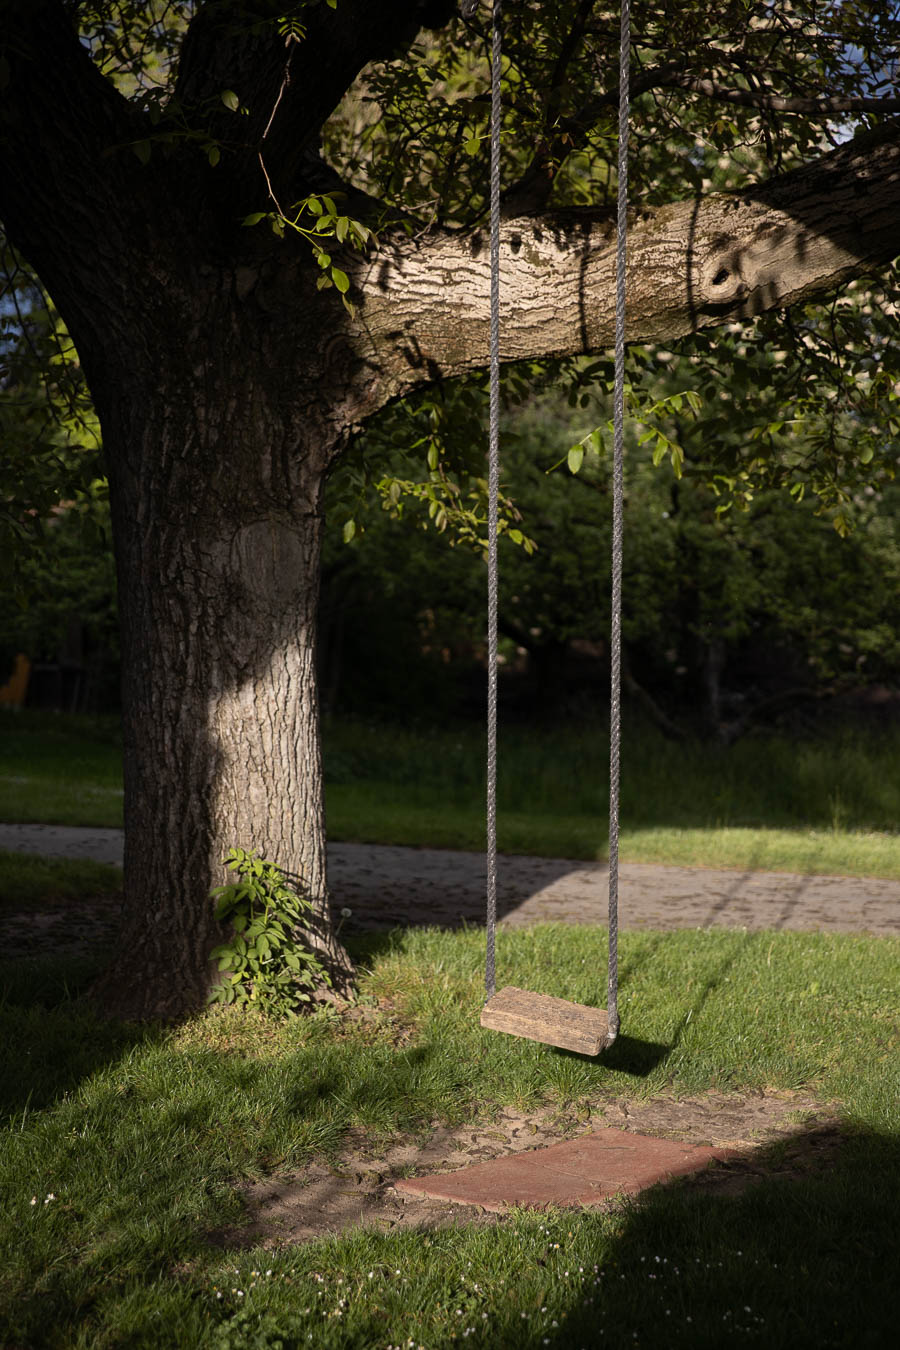 Unedited Raw File: beautifully lit swing hanging from a tree at Paradieshof in Binningen